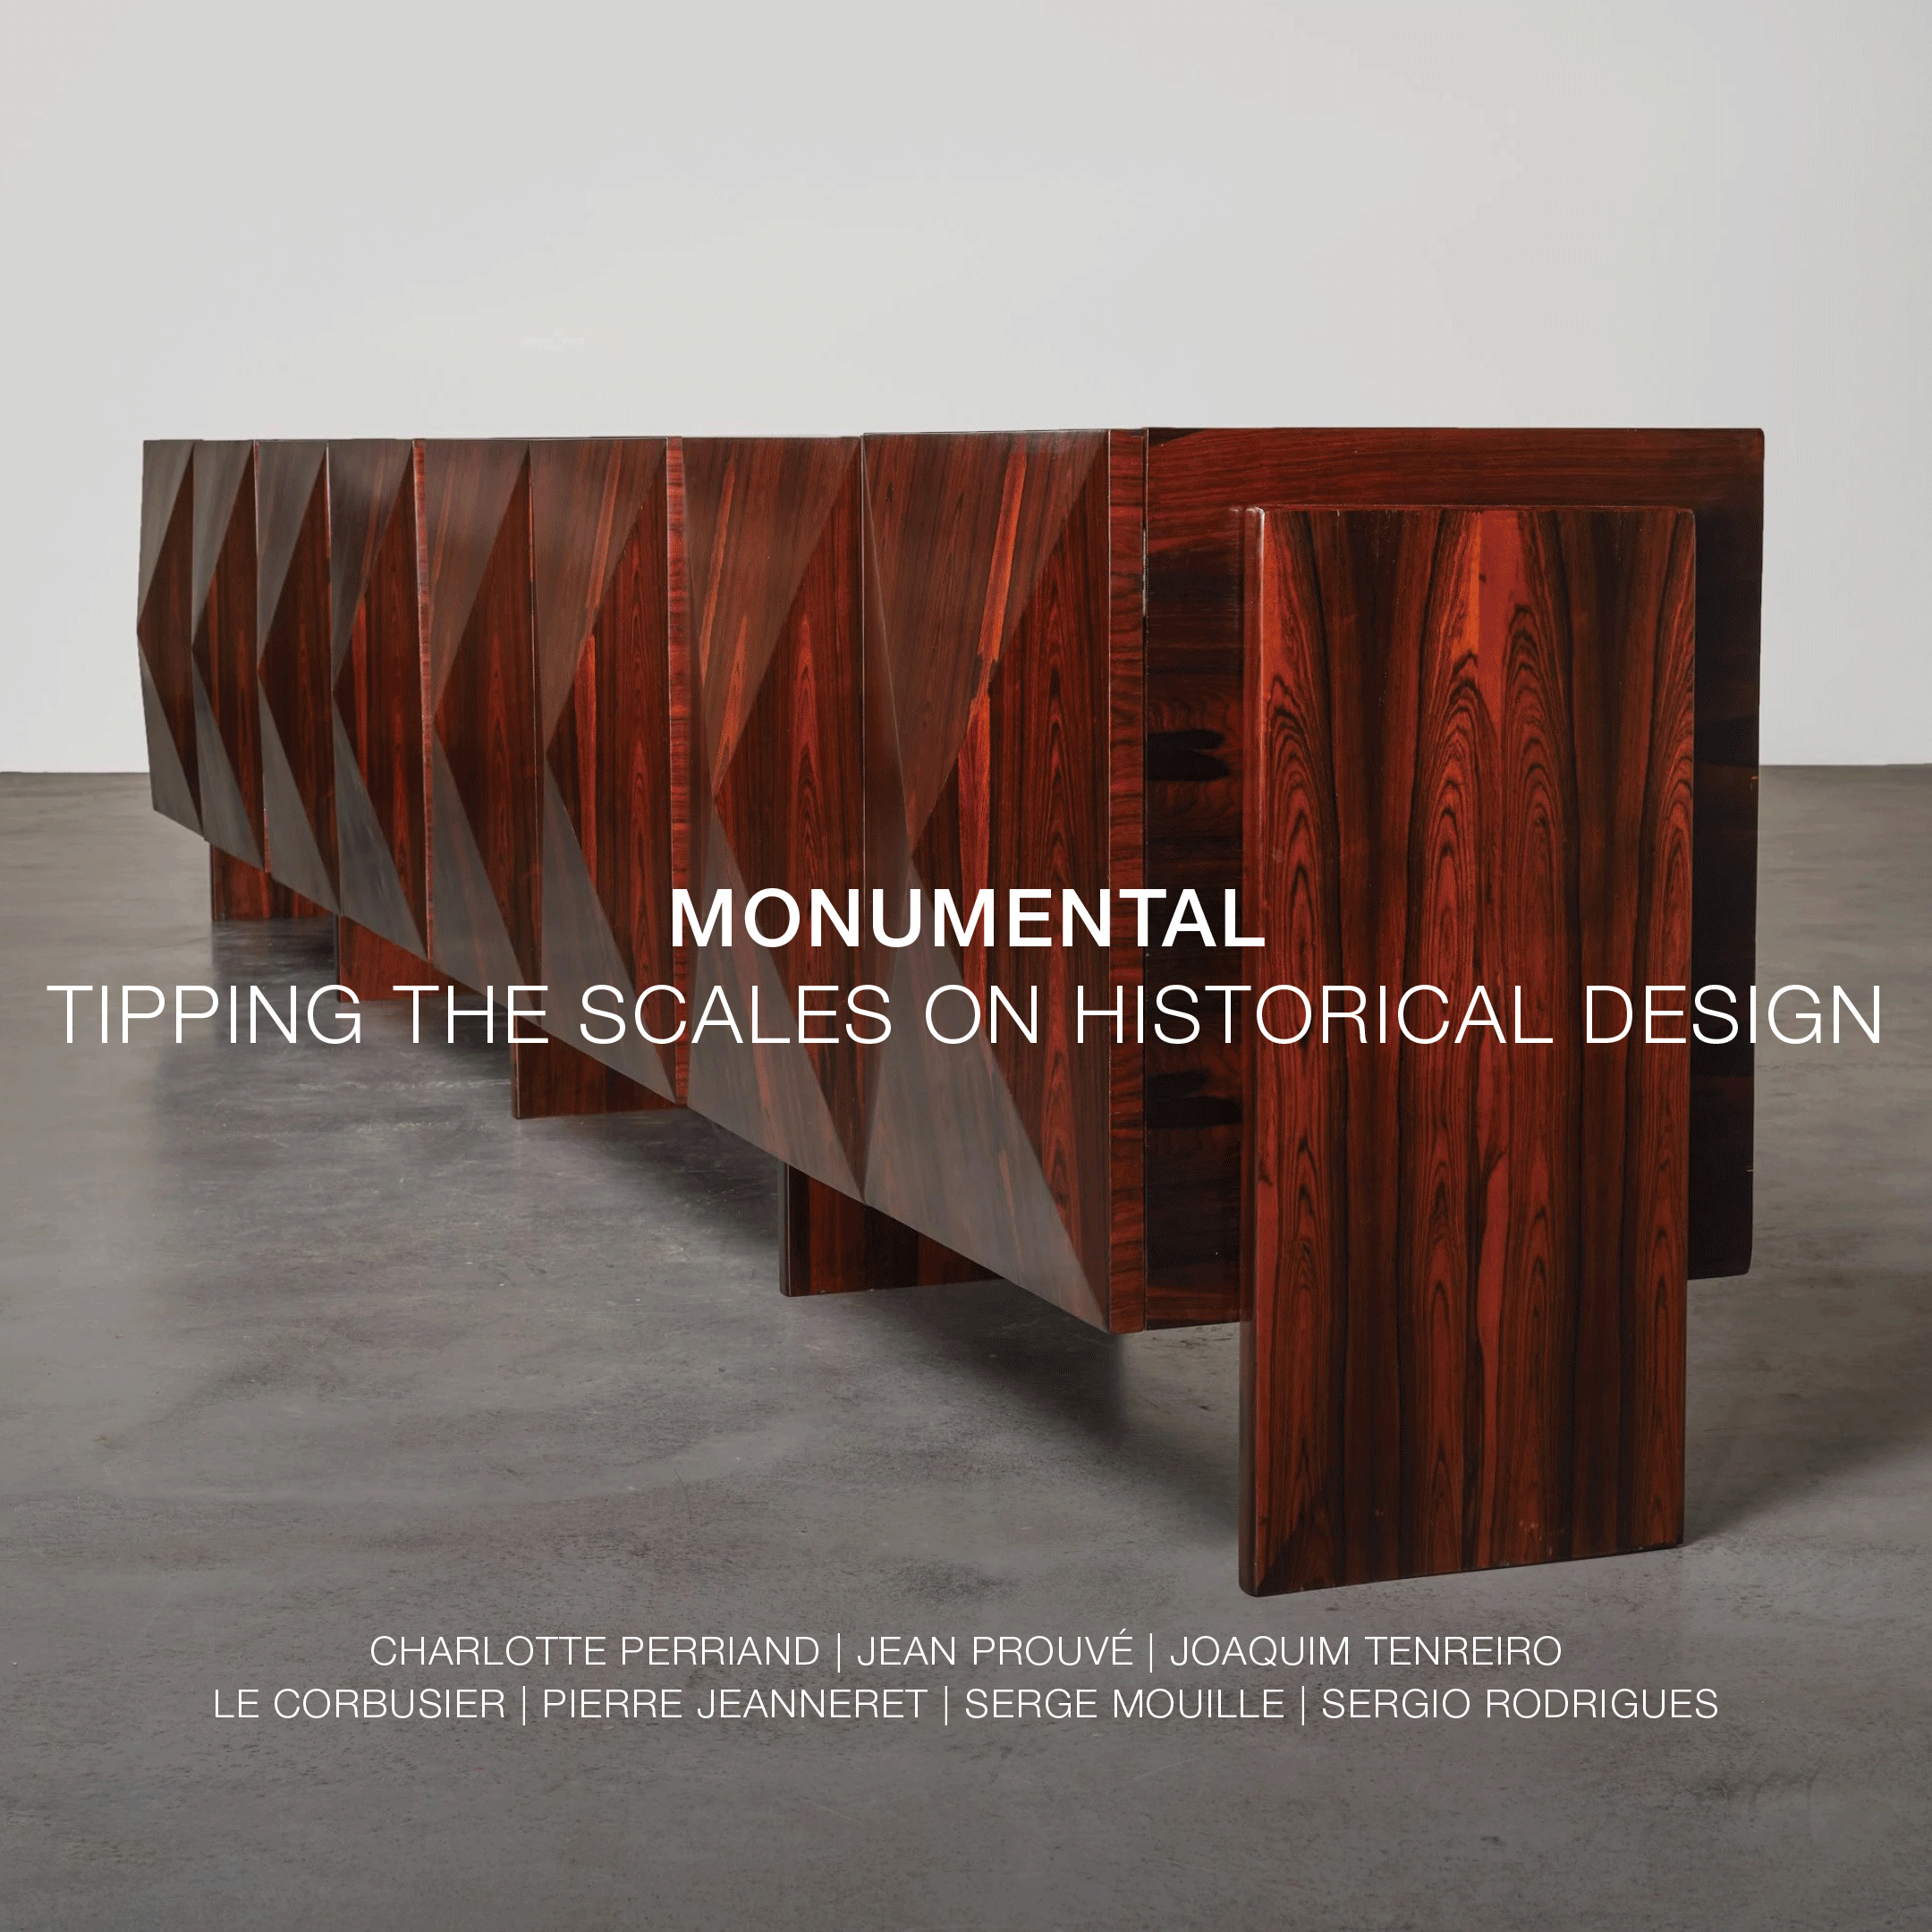 MONUMENTAL: Tipping the Scales on Historical Design